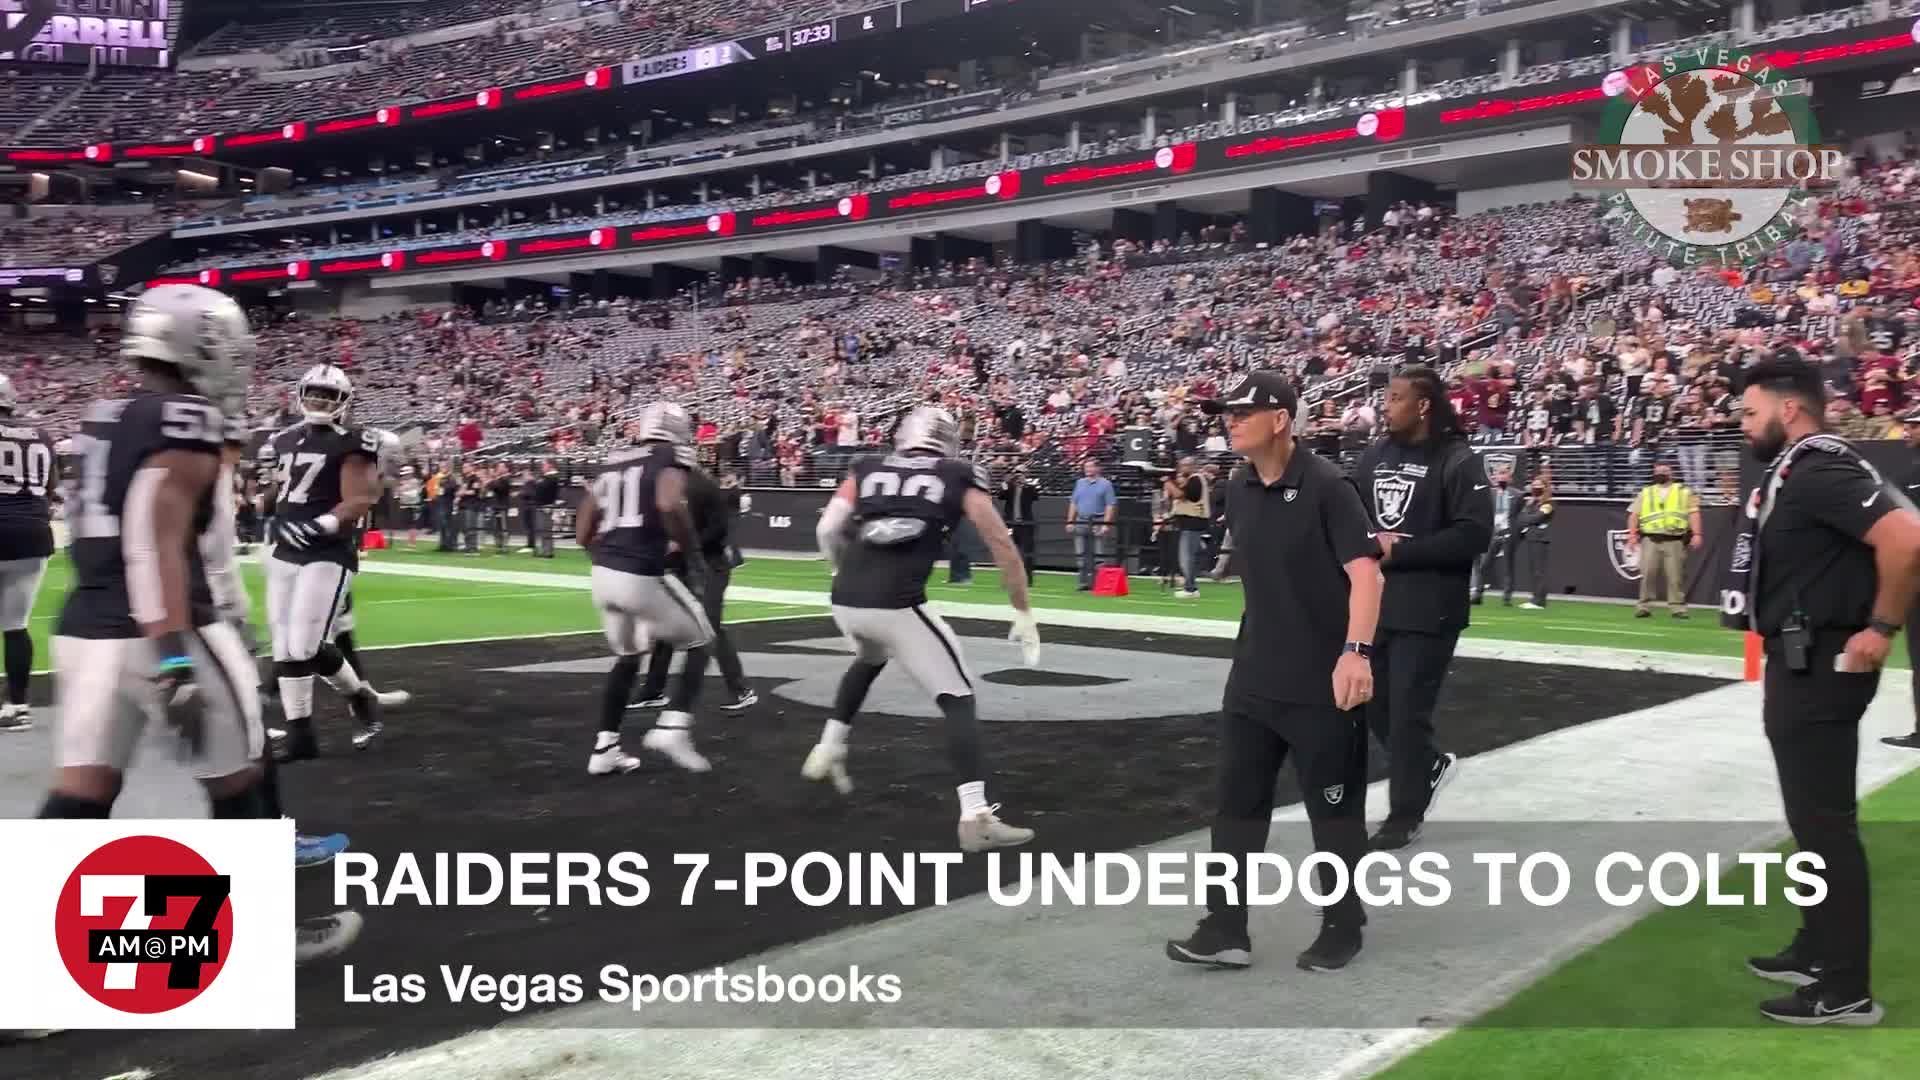 7@7PM Raiders 7-Point Underdogs to Colts